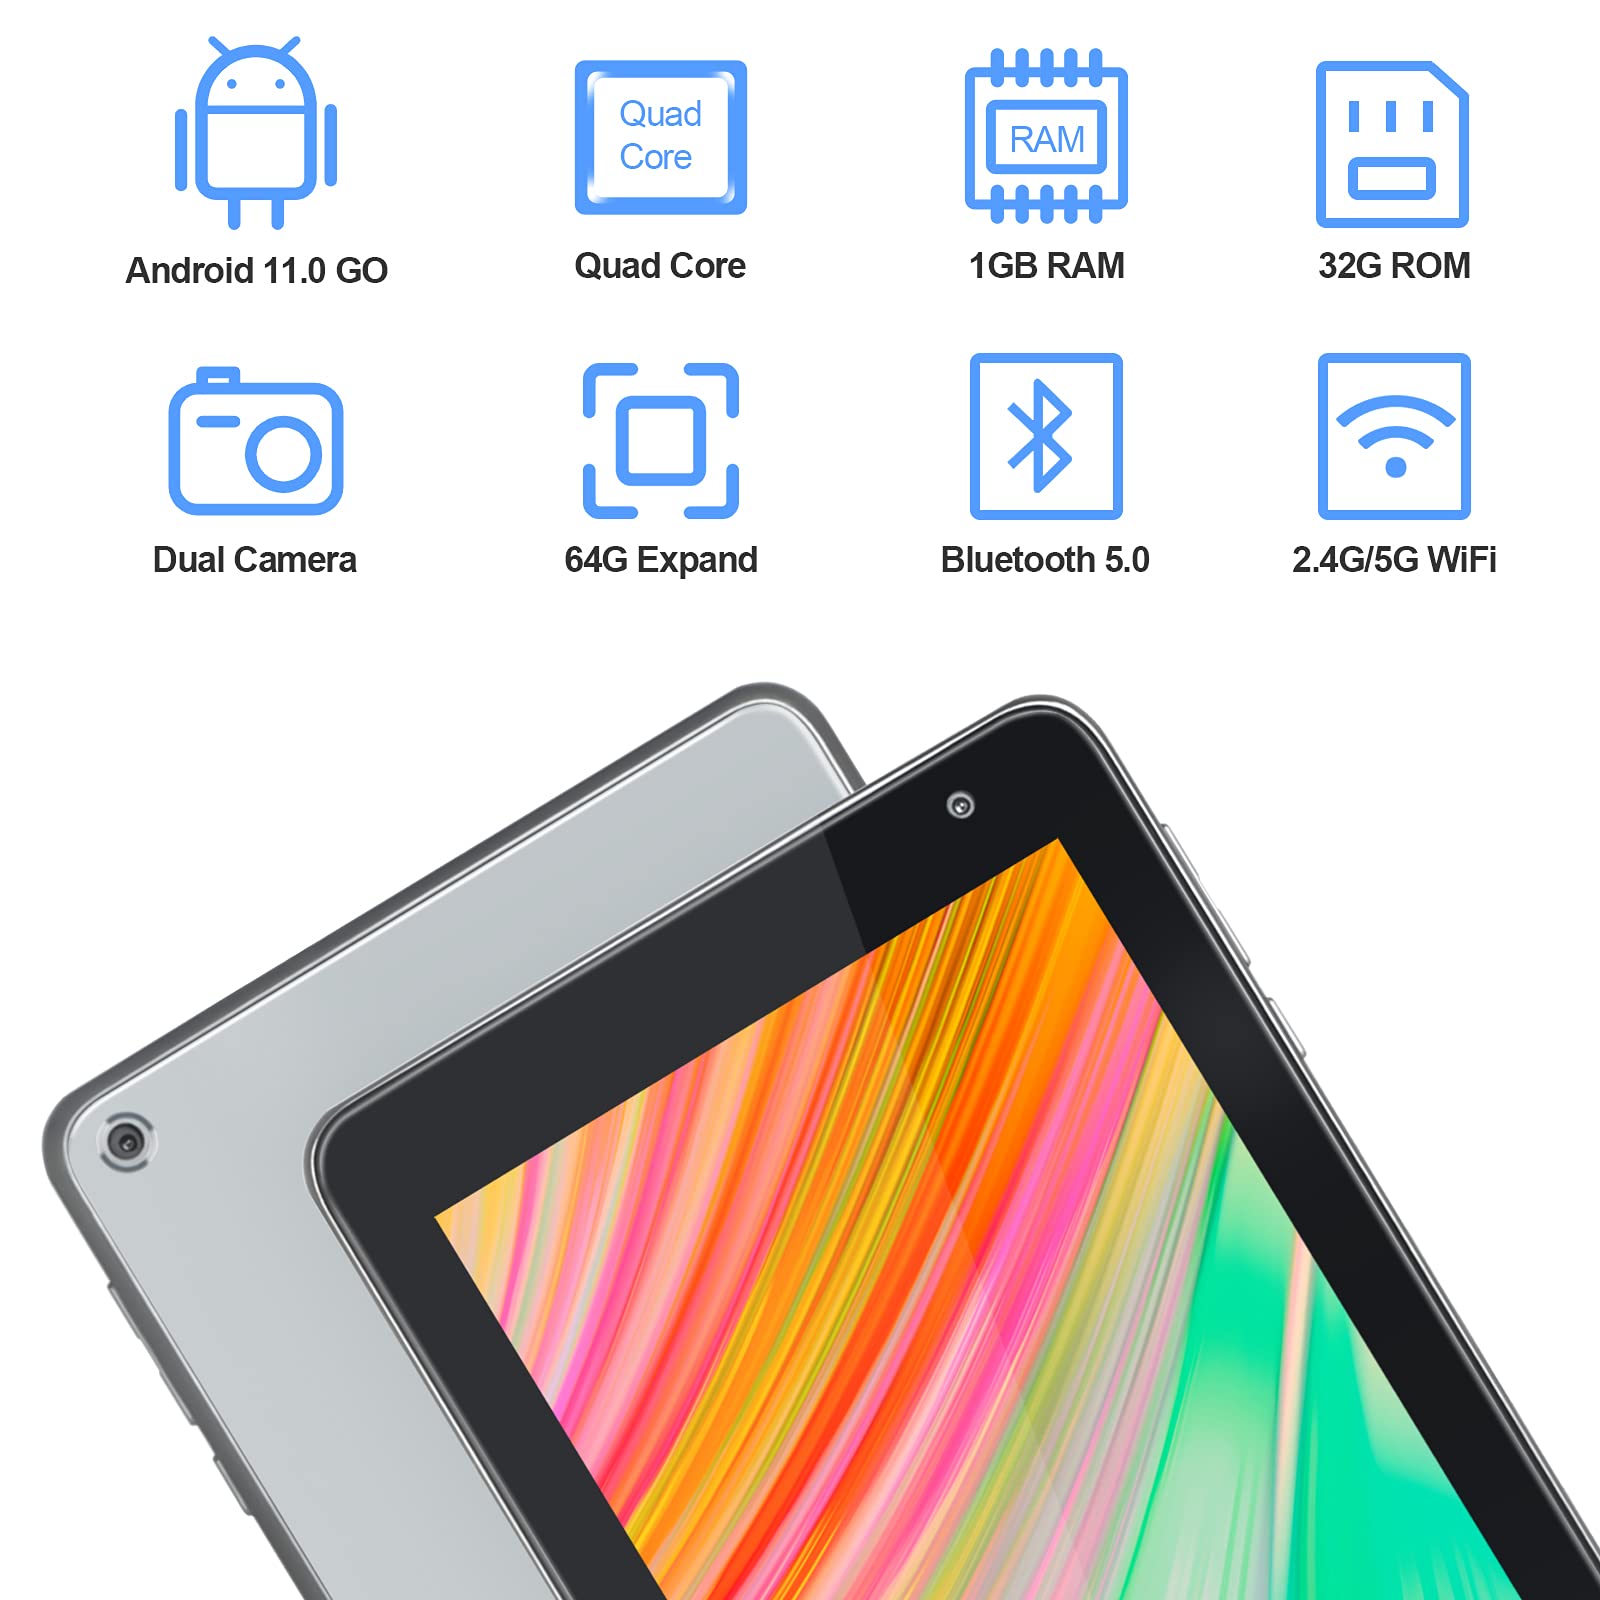 HAOVM Android 11 Go Tablet 7 Inch, MediaPad P7S Tablets,Quad-Core 1.4GHz Processor,Dual Camera,2GB RAM,1024 x 600 IPS HD Display Screen,128GB Expand,2.4/5.0GHz WiFi,BT5.0,Non-Scratch Glass Back